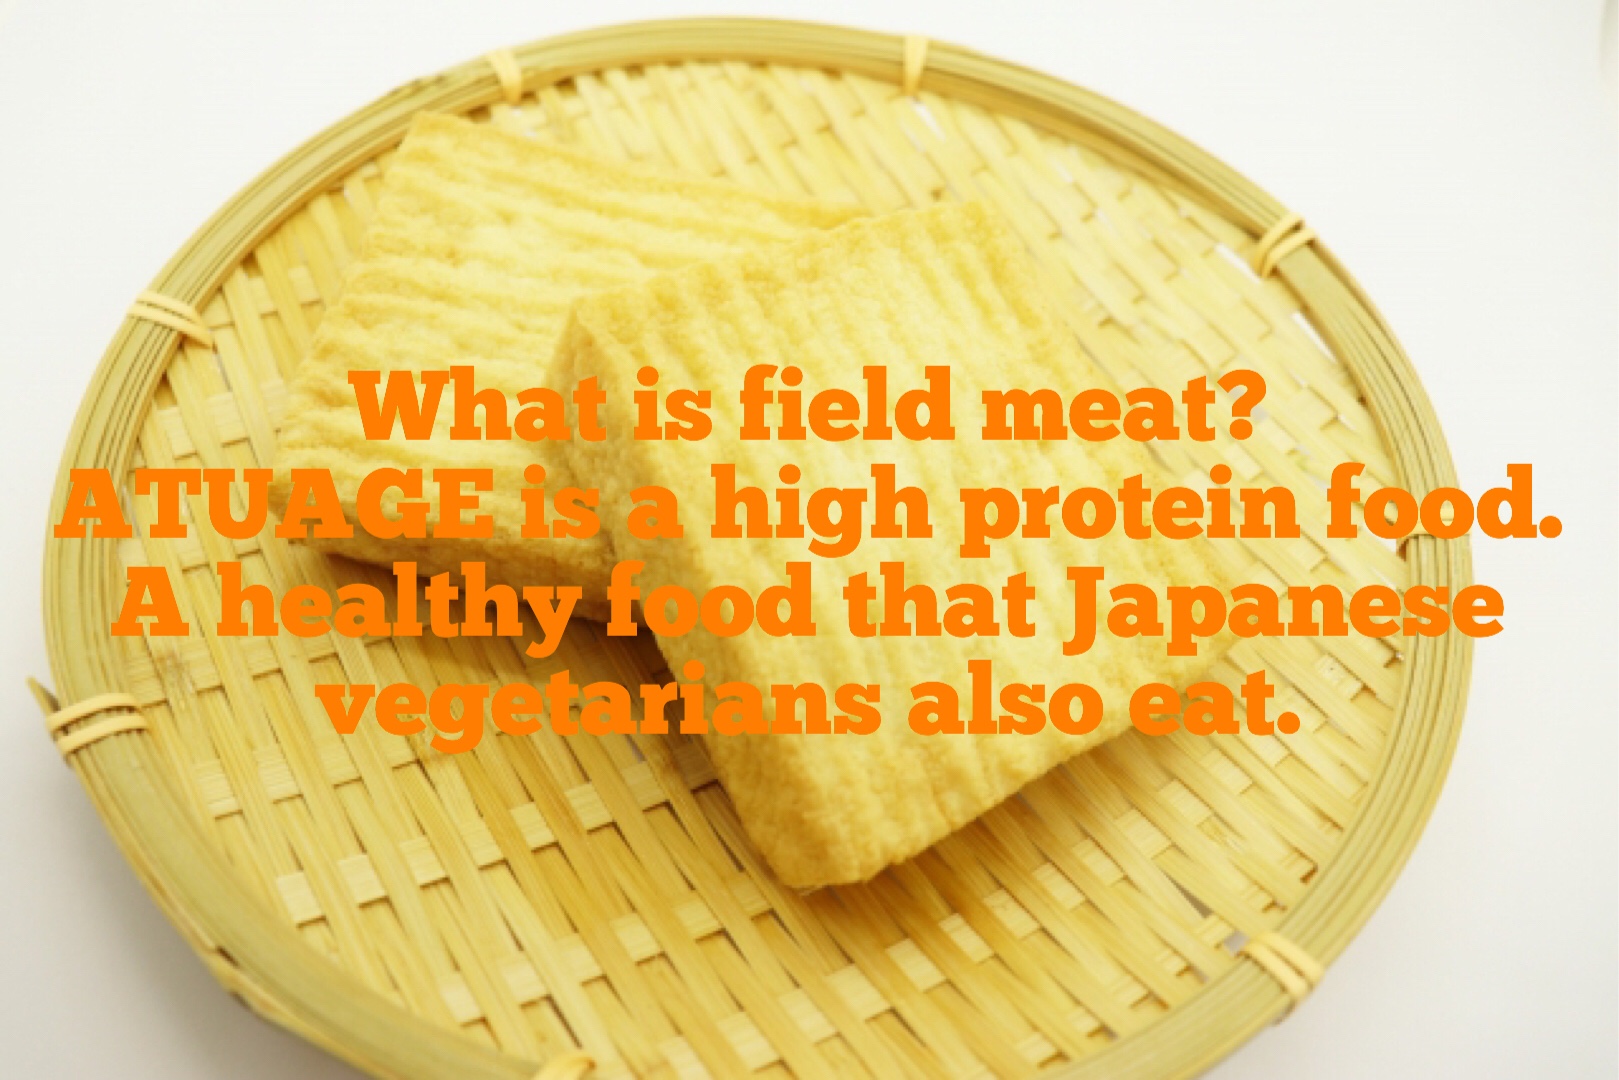 ●What is field meat? Atuage is a high protein food. It is a healthy food that Japanese vegetarians also eat.